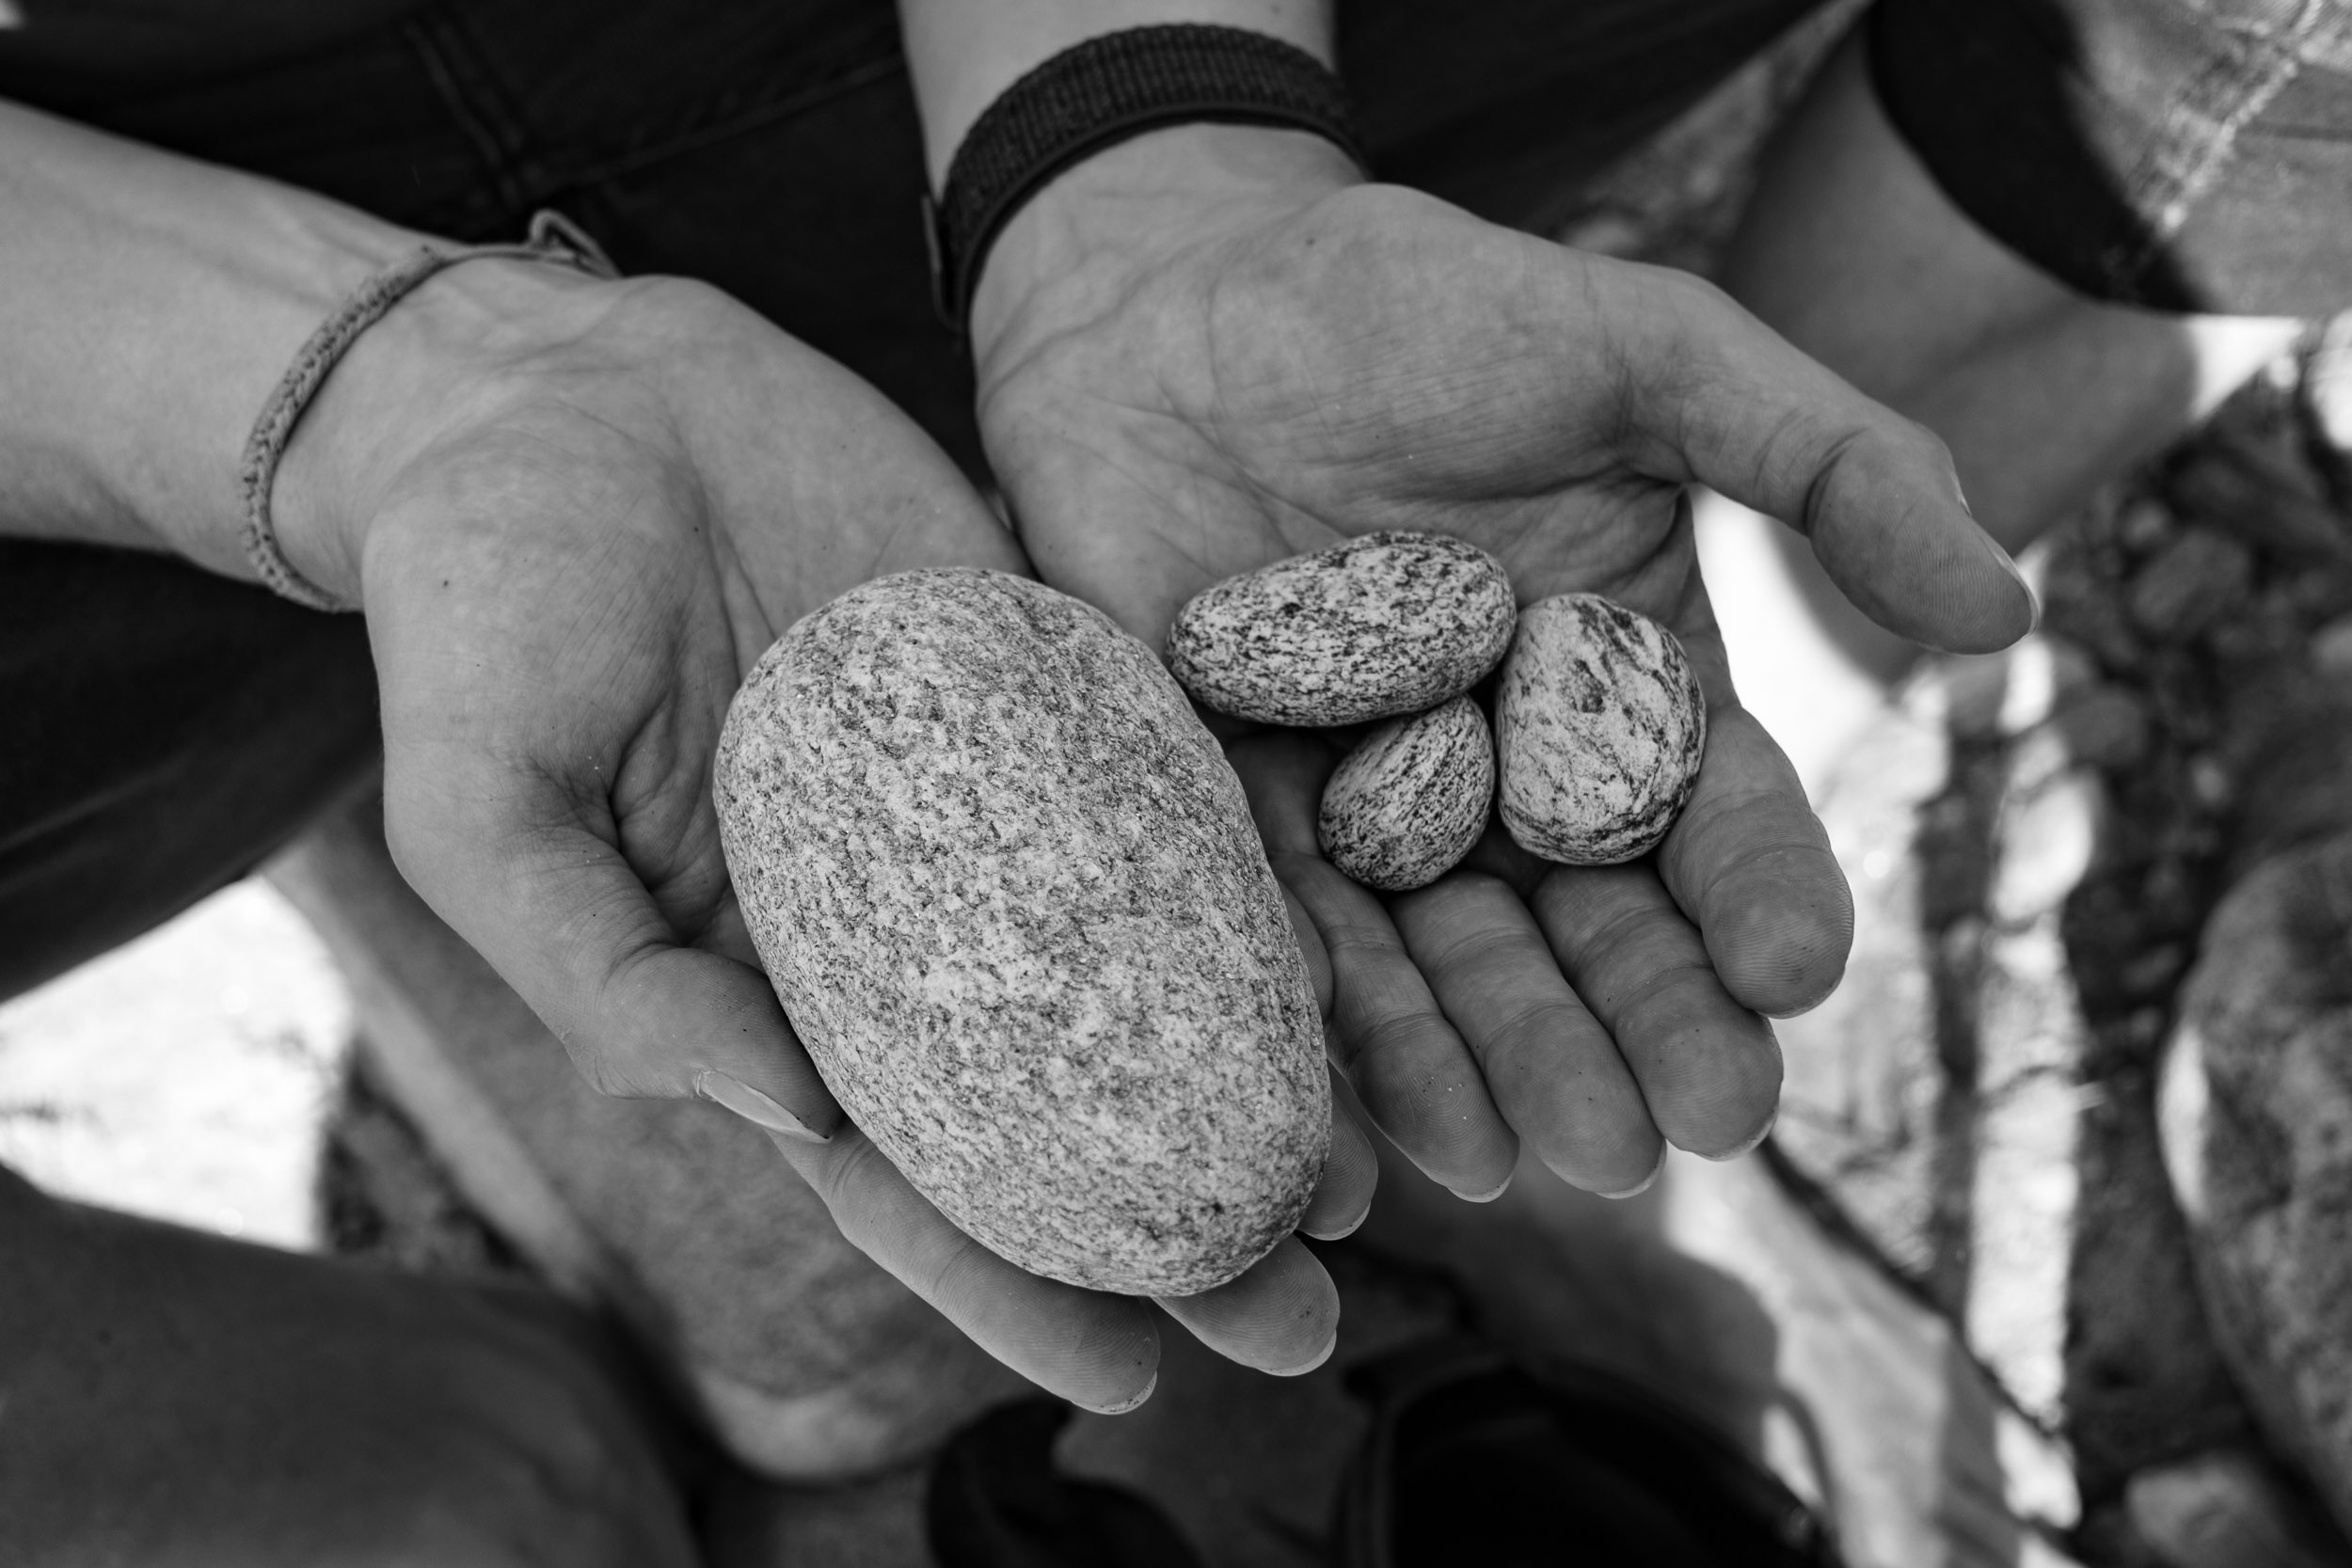 Some rocks we collected at the river Maggia (Ticino).